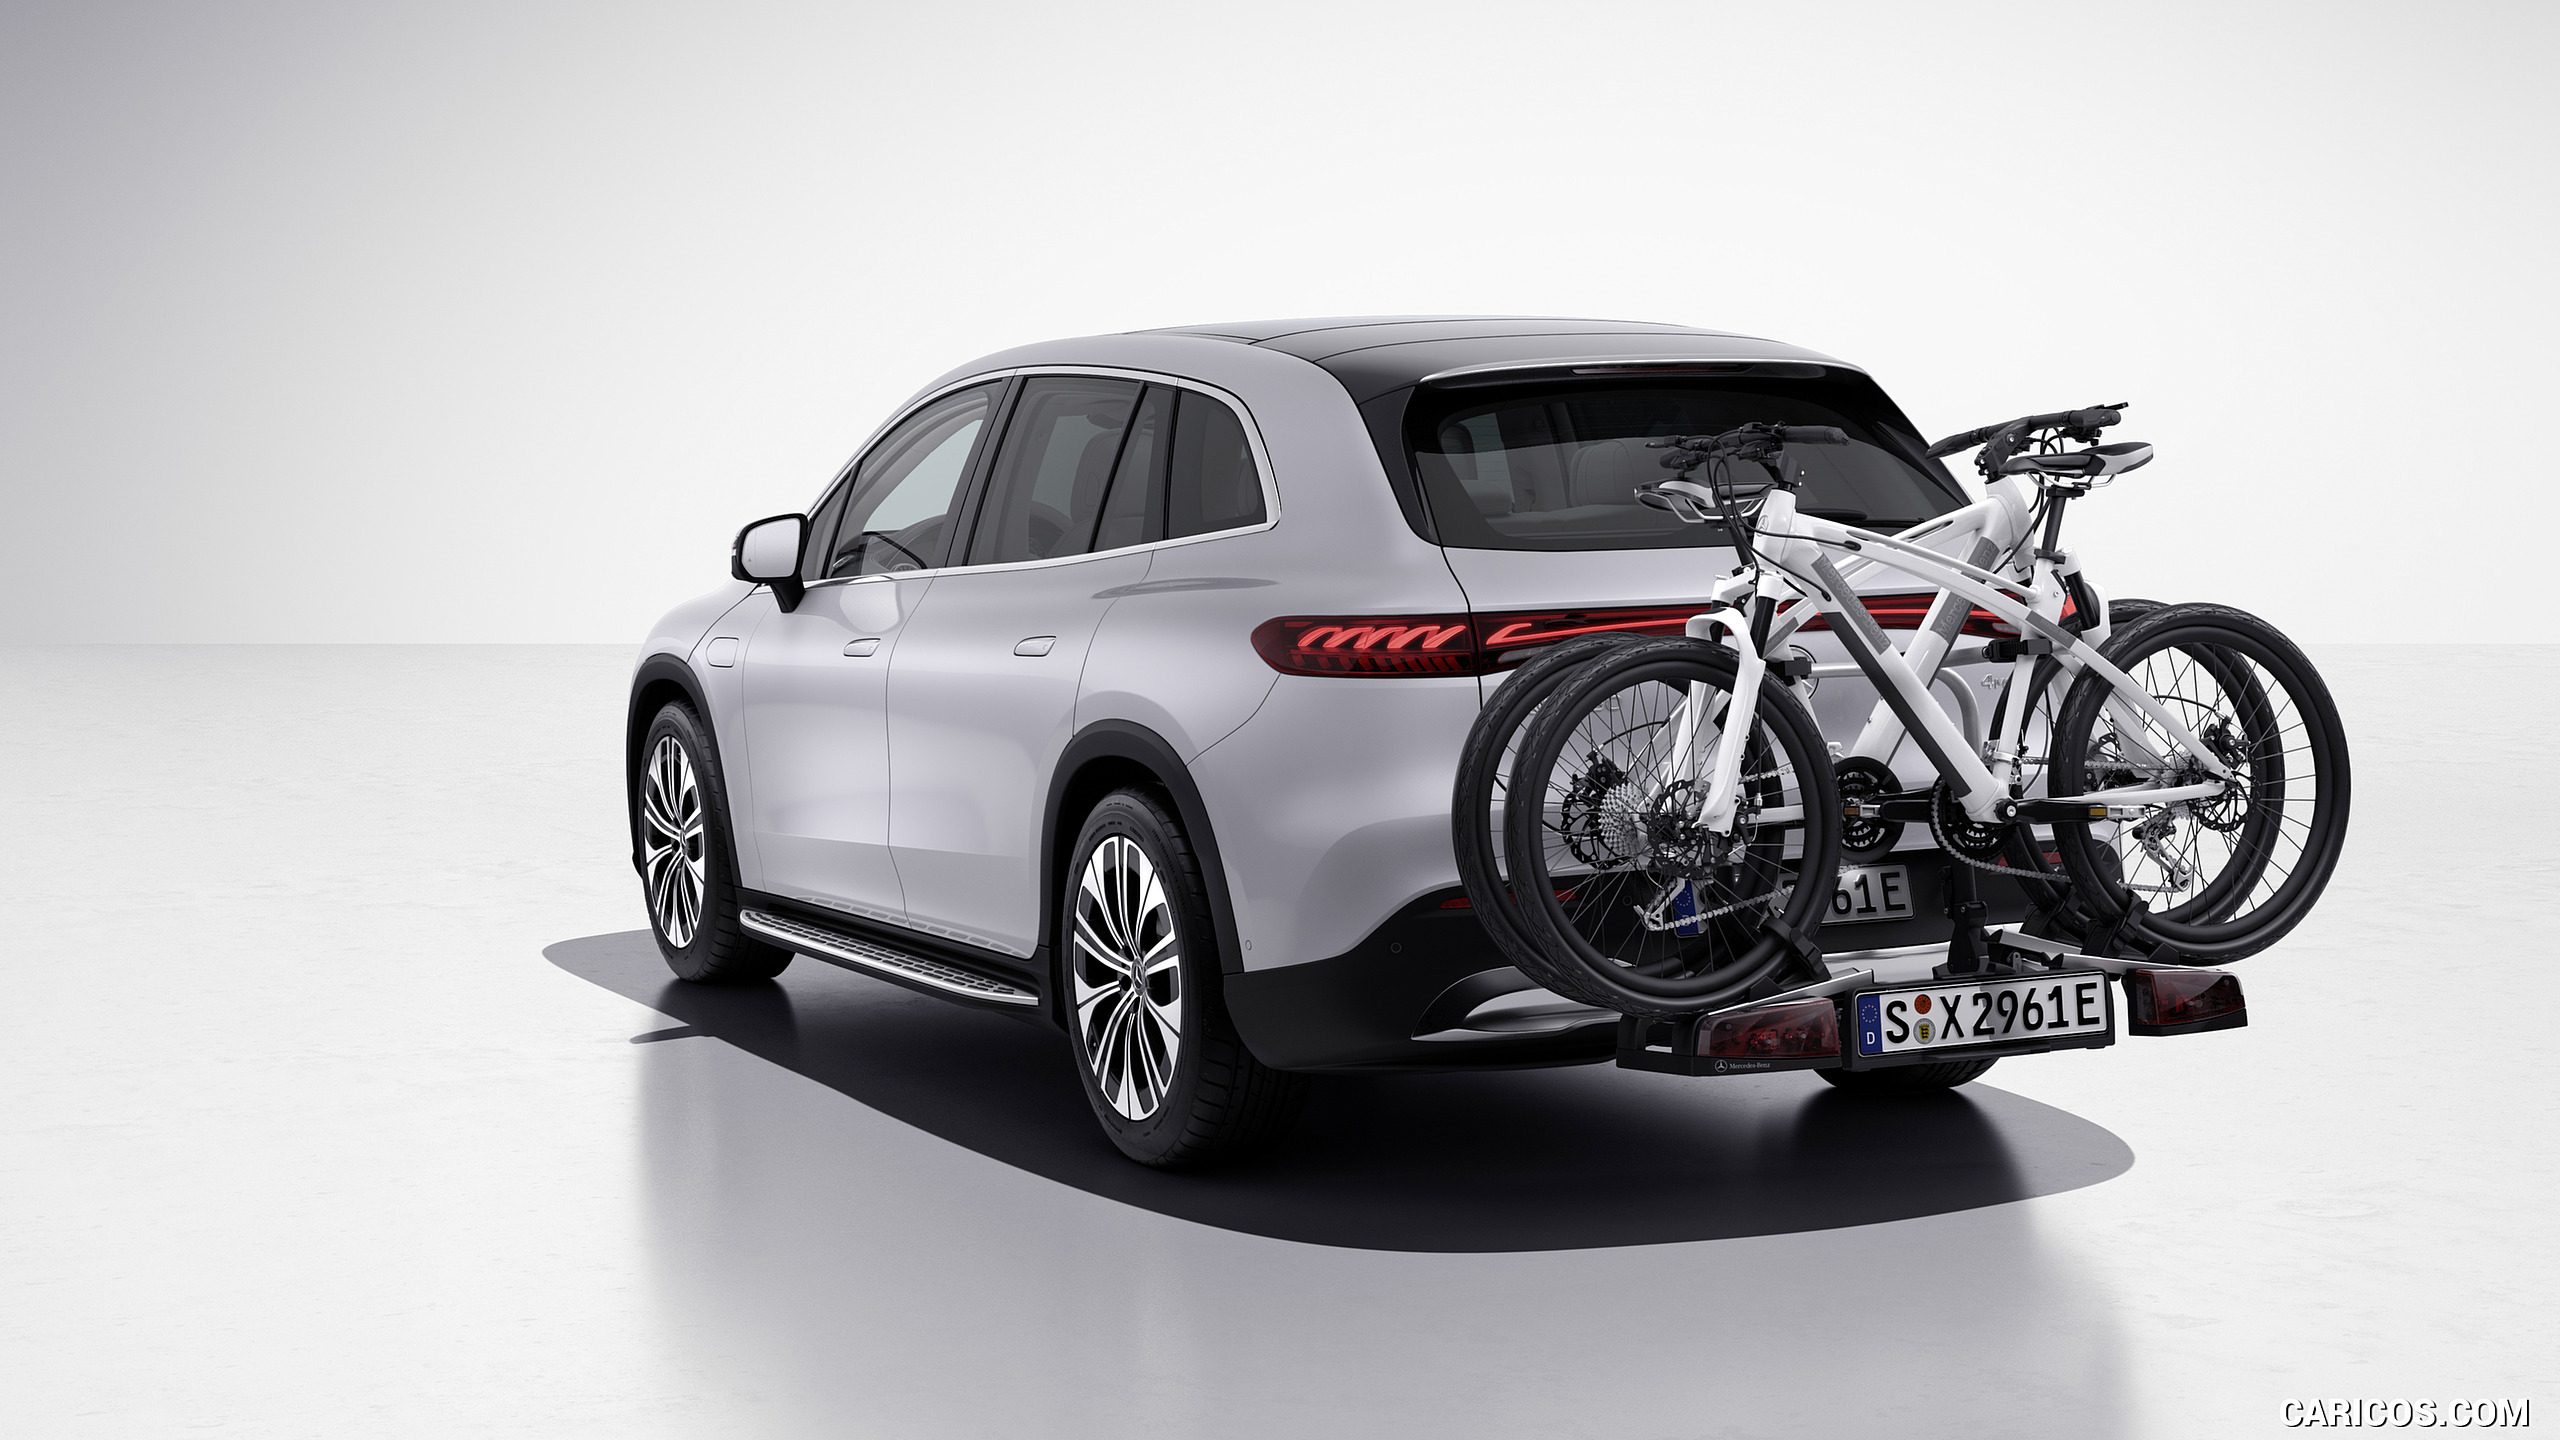 2023 Mercedes-Benz EQS SUV - With towbar and bicycle carrier, #201 of 212